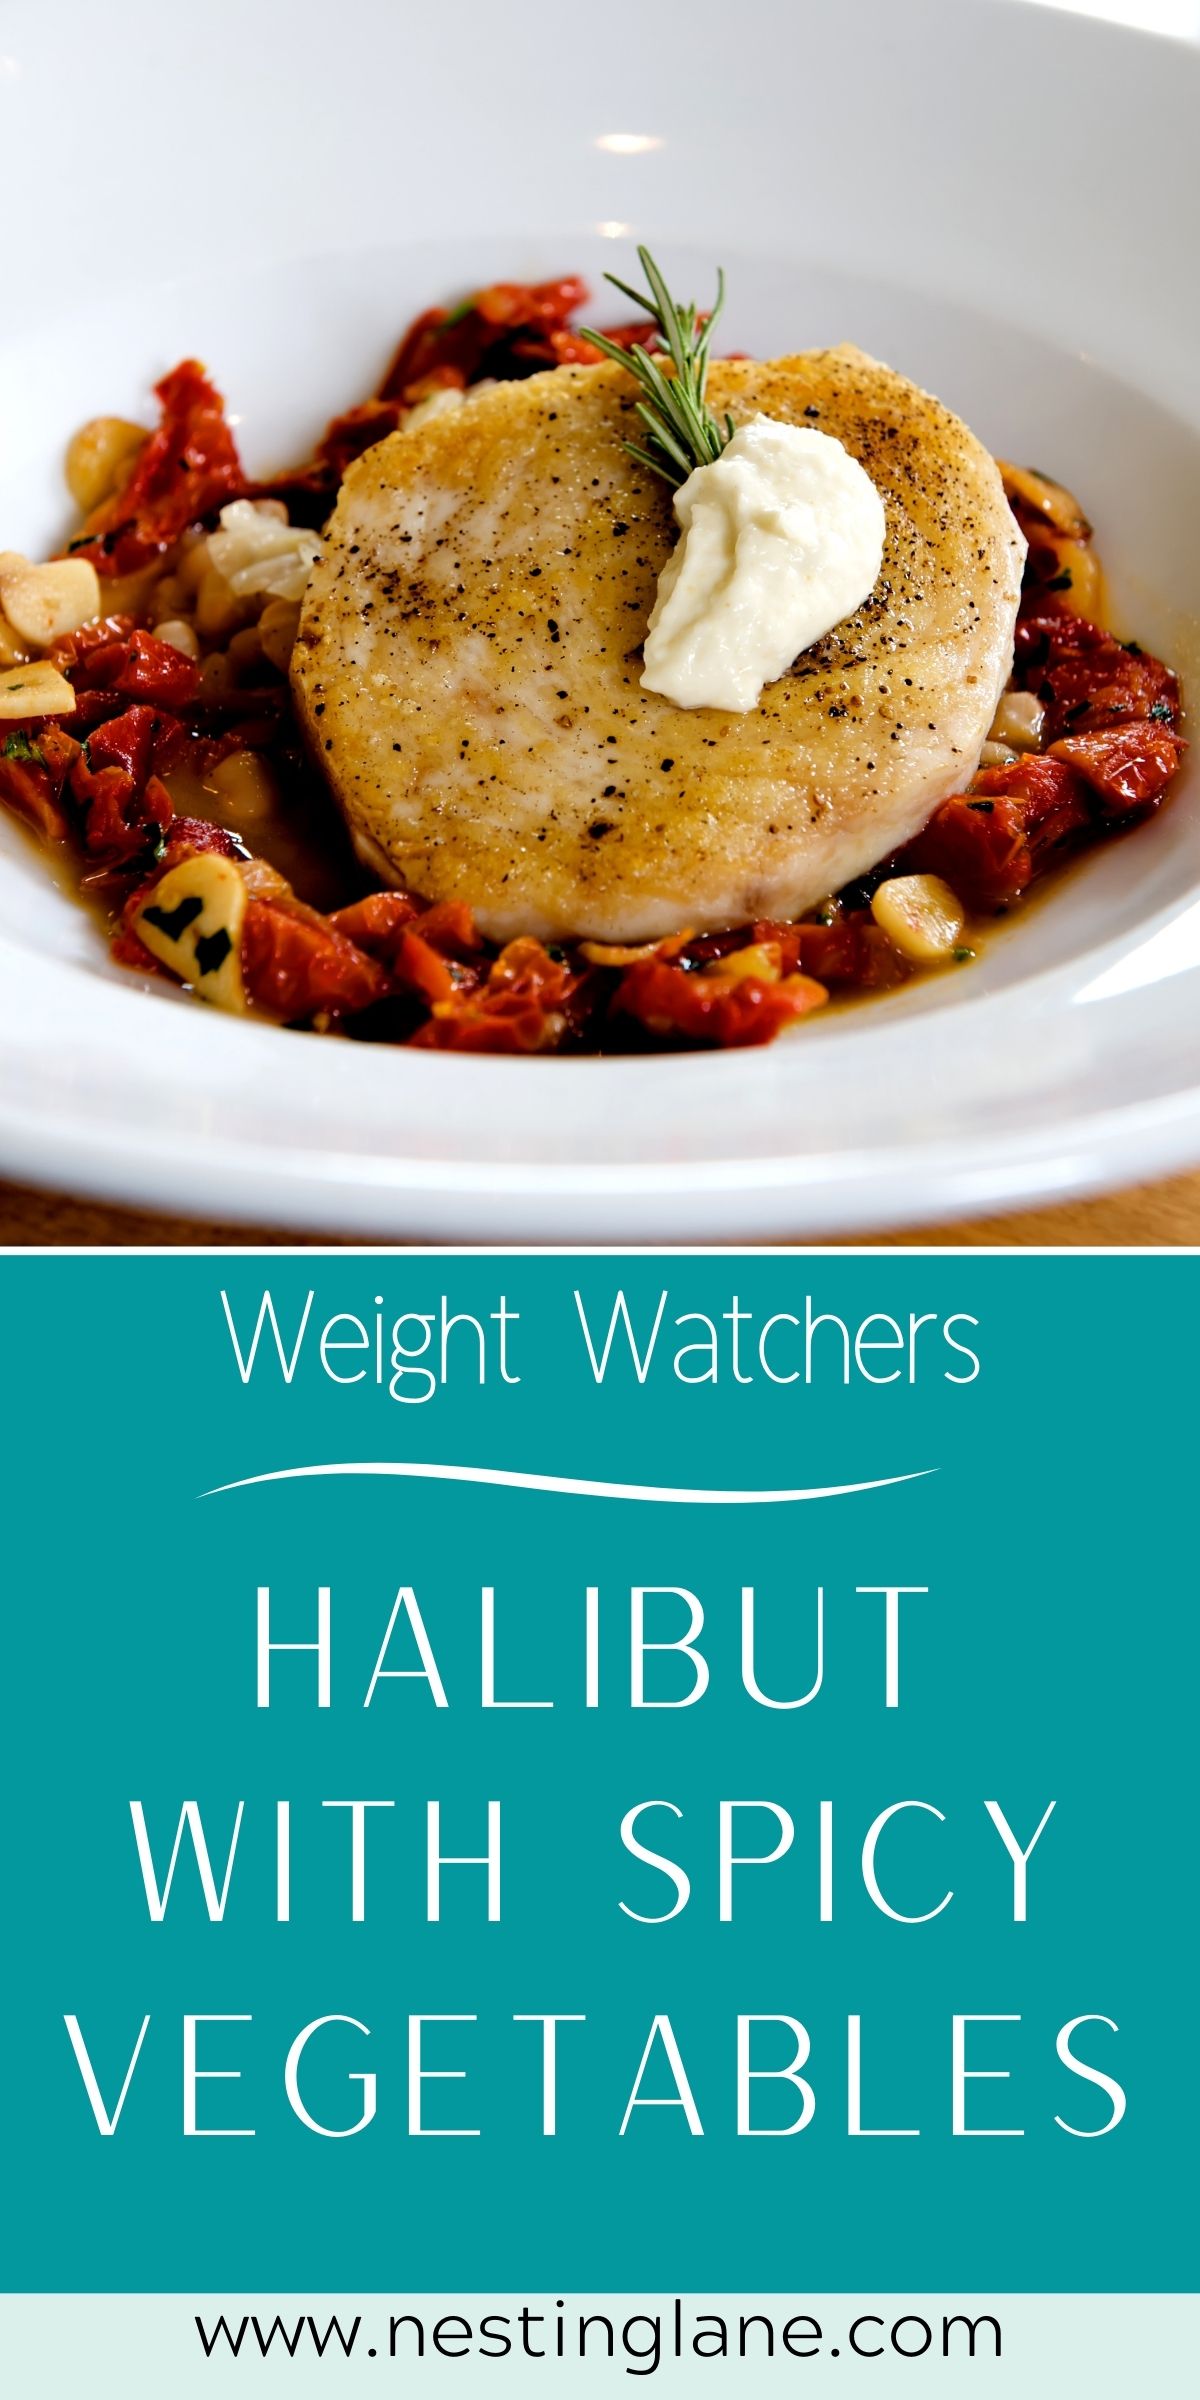 Graphic for Pinterest of Weight Watchers Halibut With Spicy Vegetables Recipe.